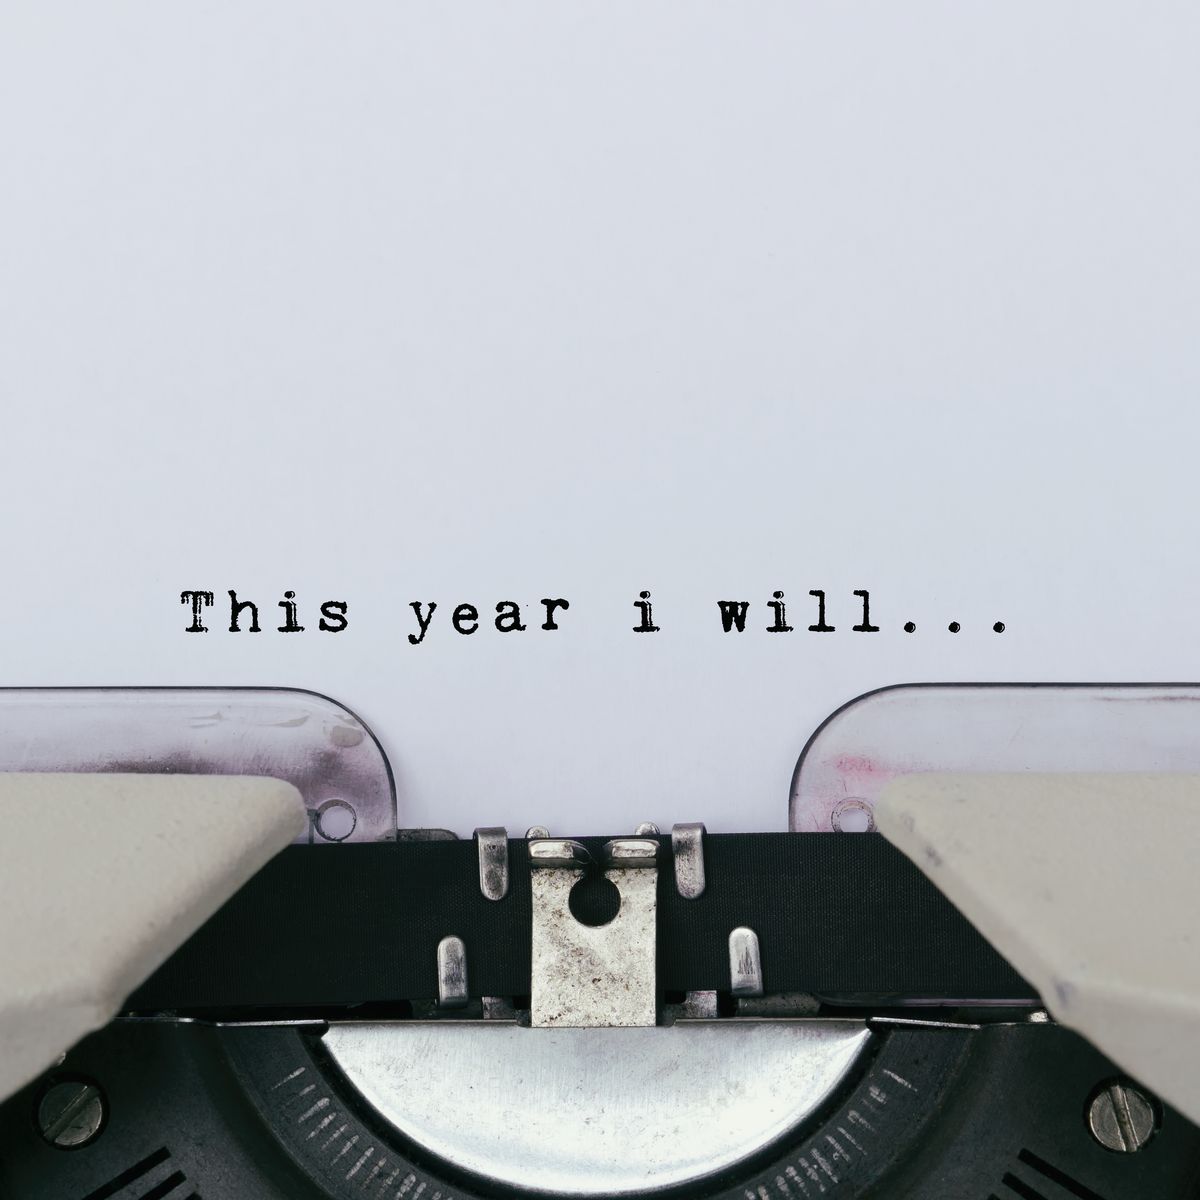 This year i will text on a vintage typewriter